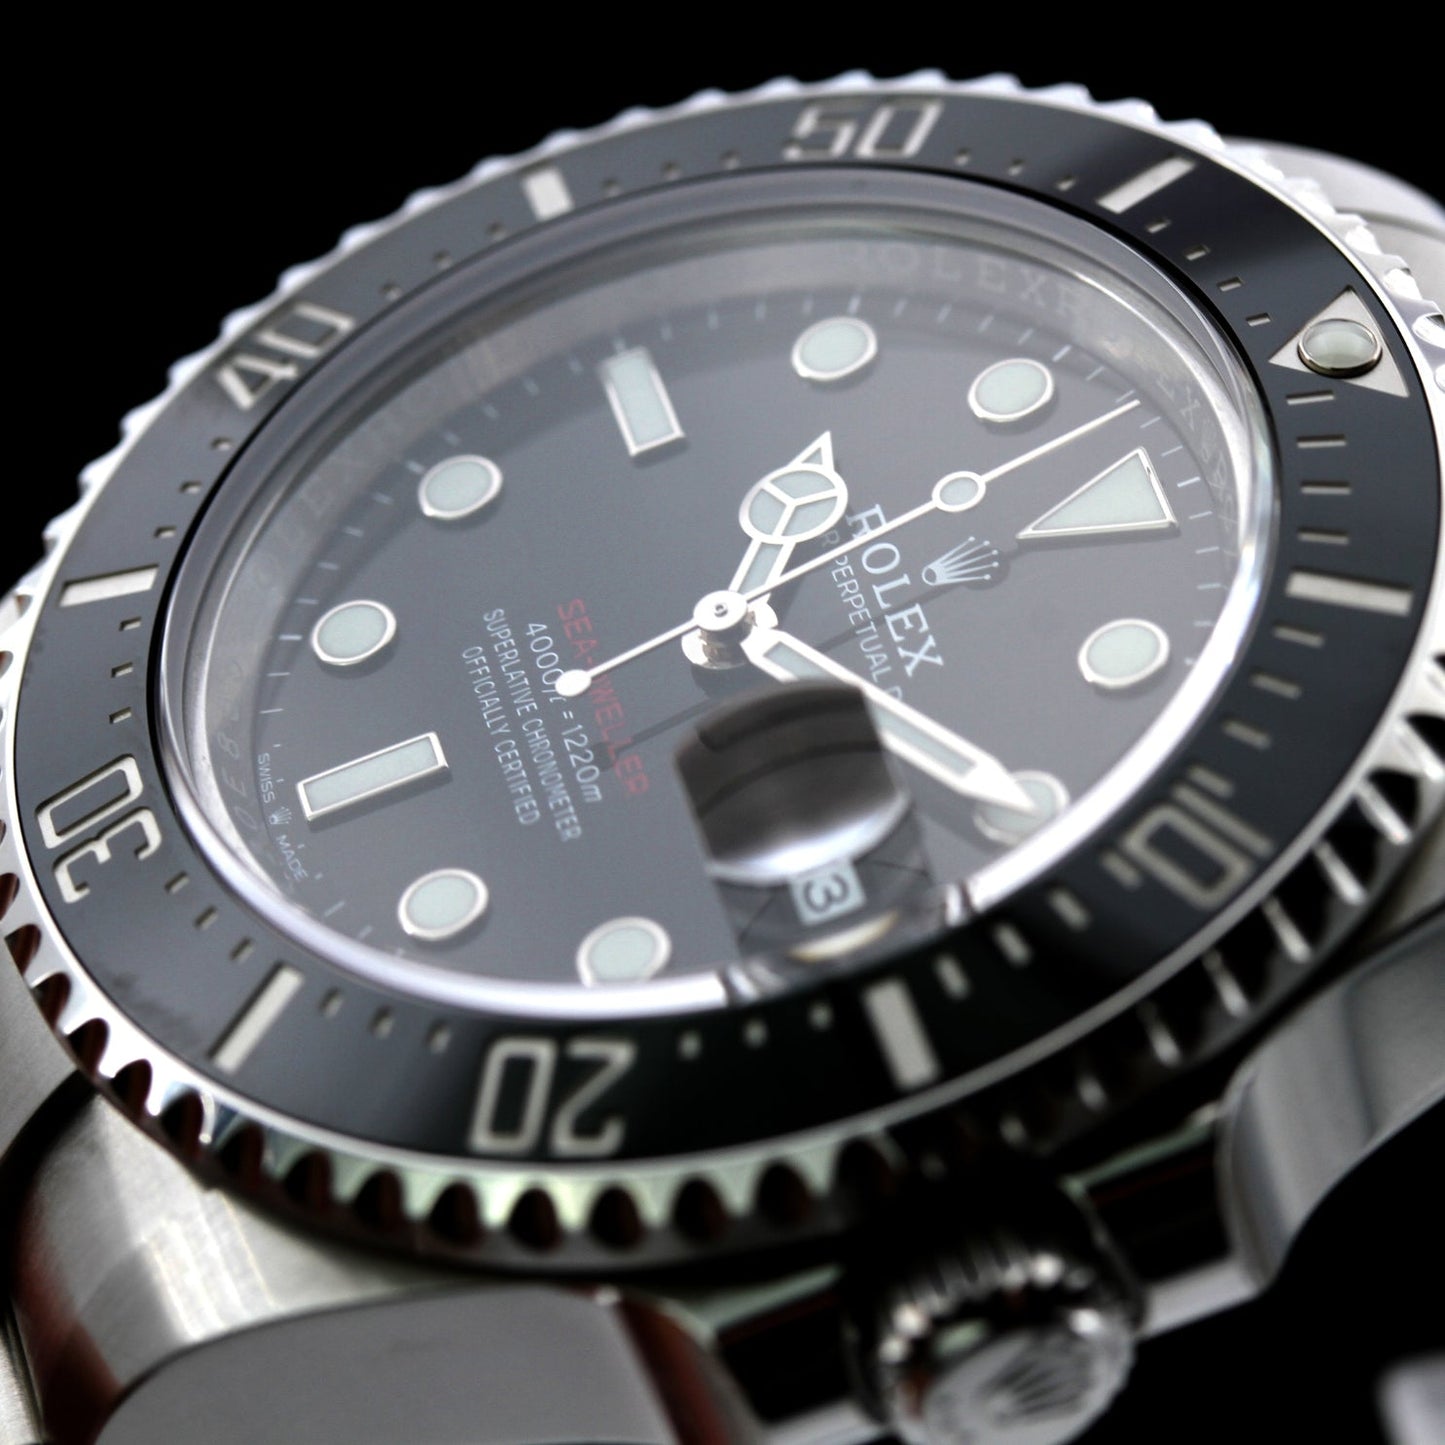 Rolex Sea-Dweller 4000ft 43mm, "Red", LC100/2020, 126600